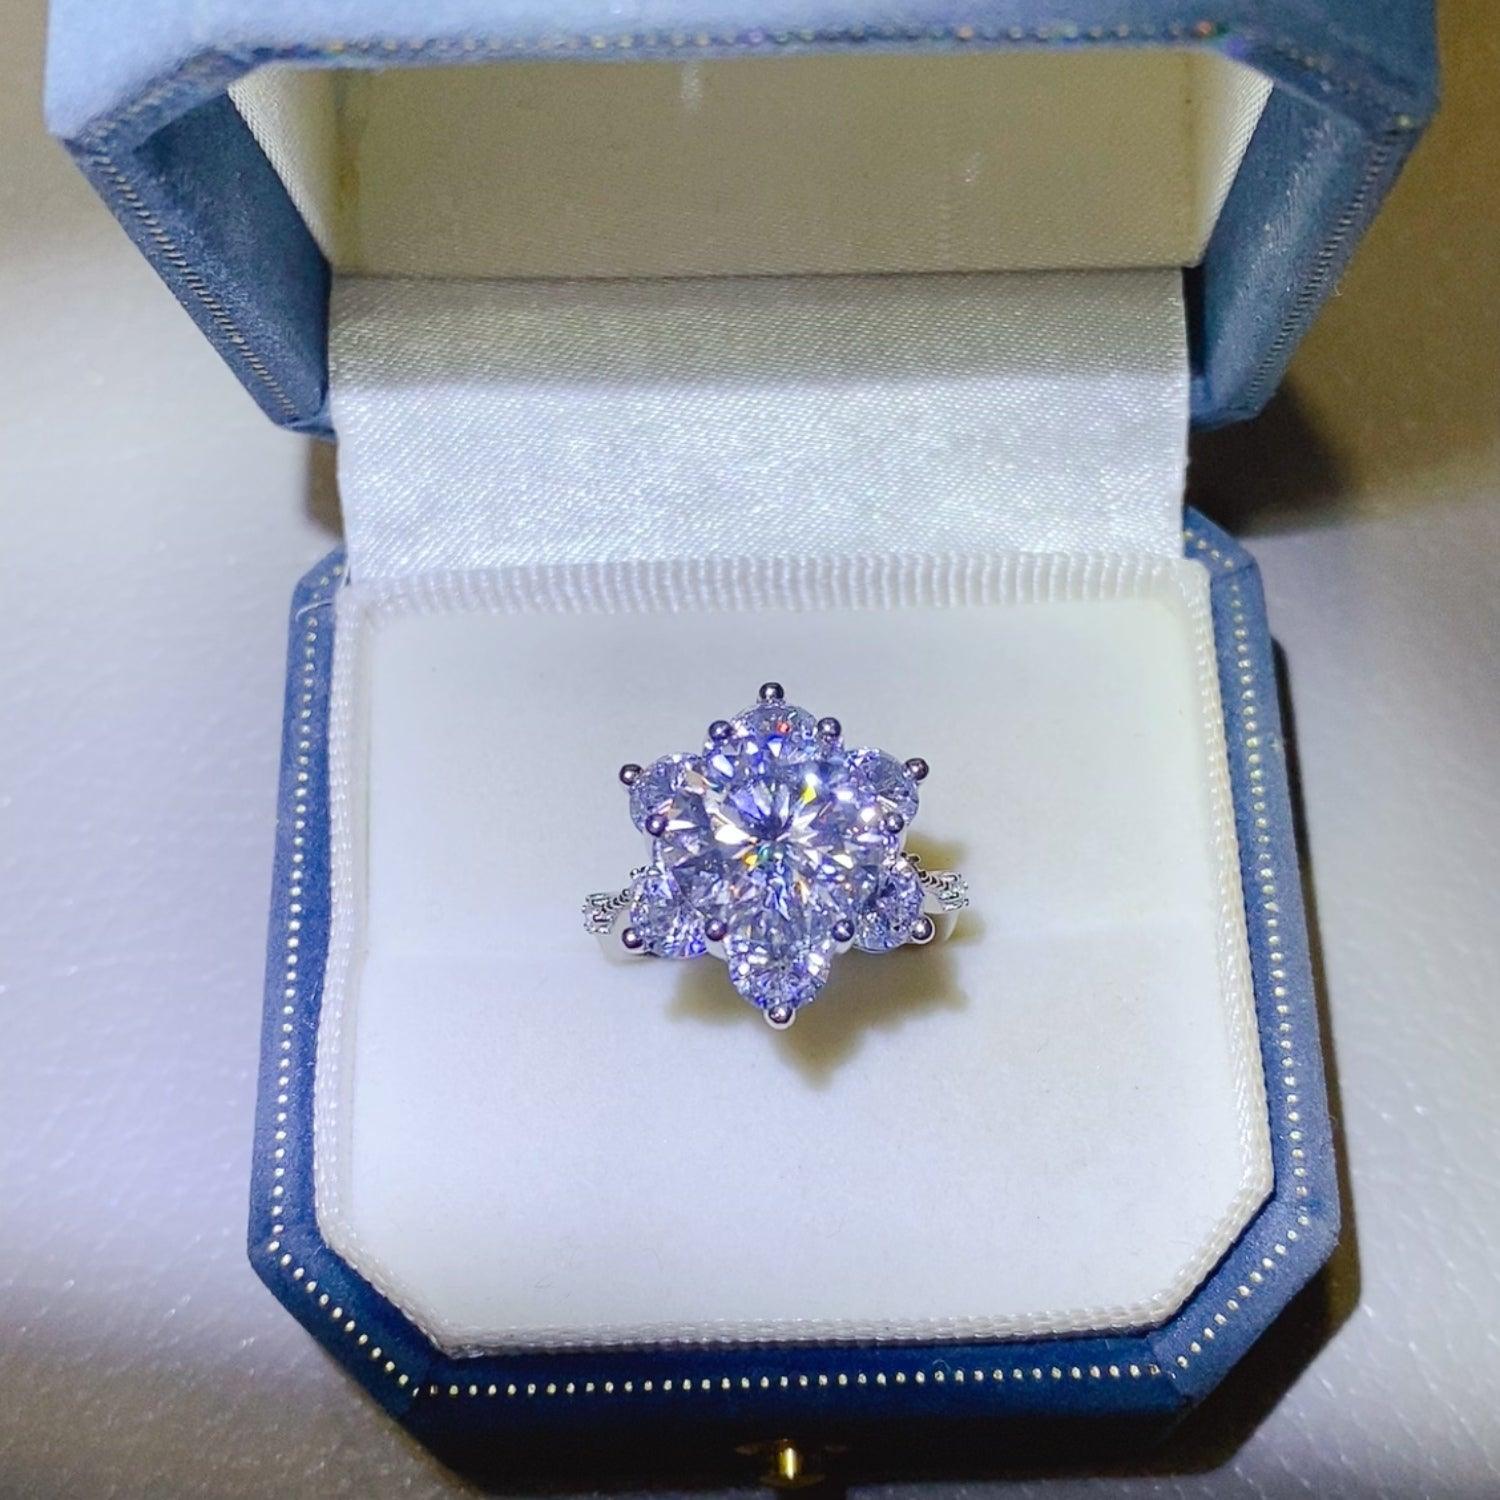 a diamond ring in a box on a table